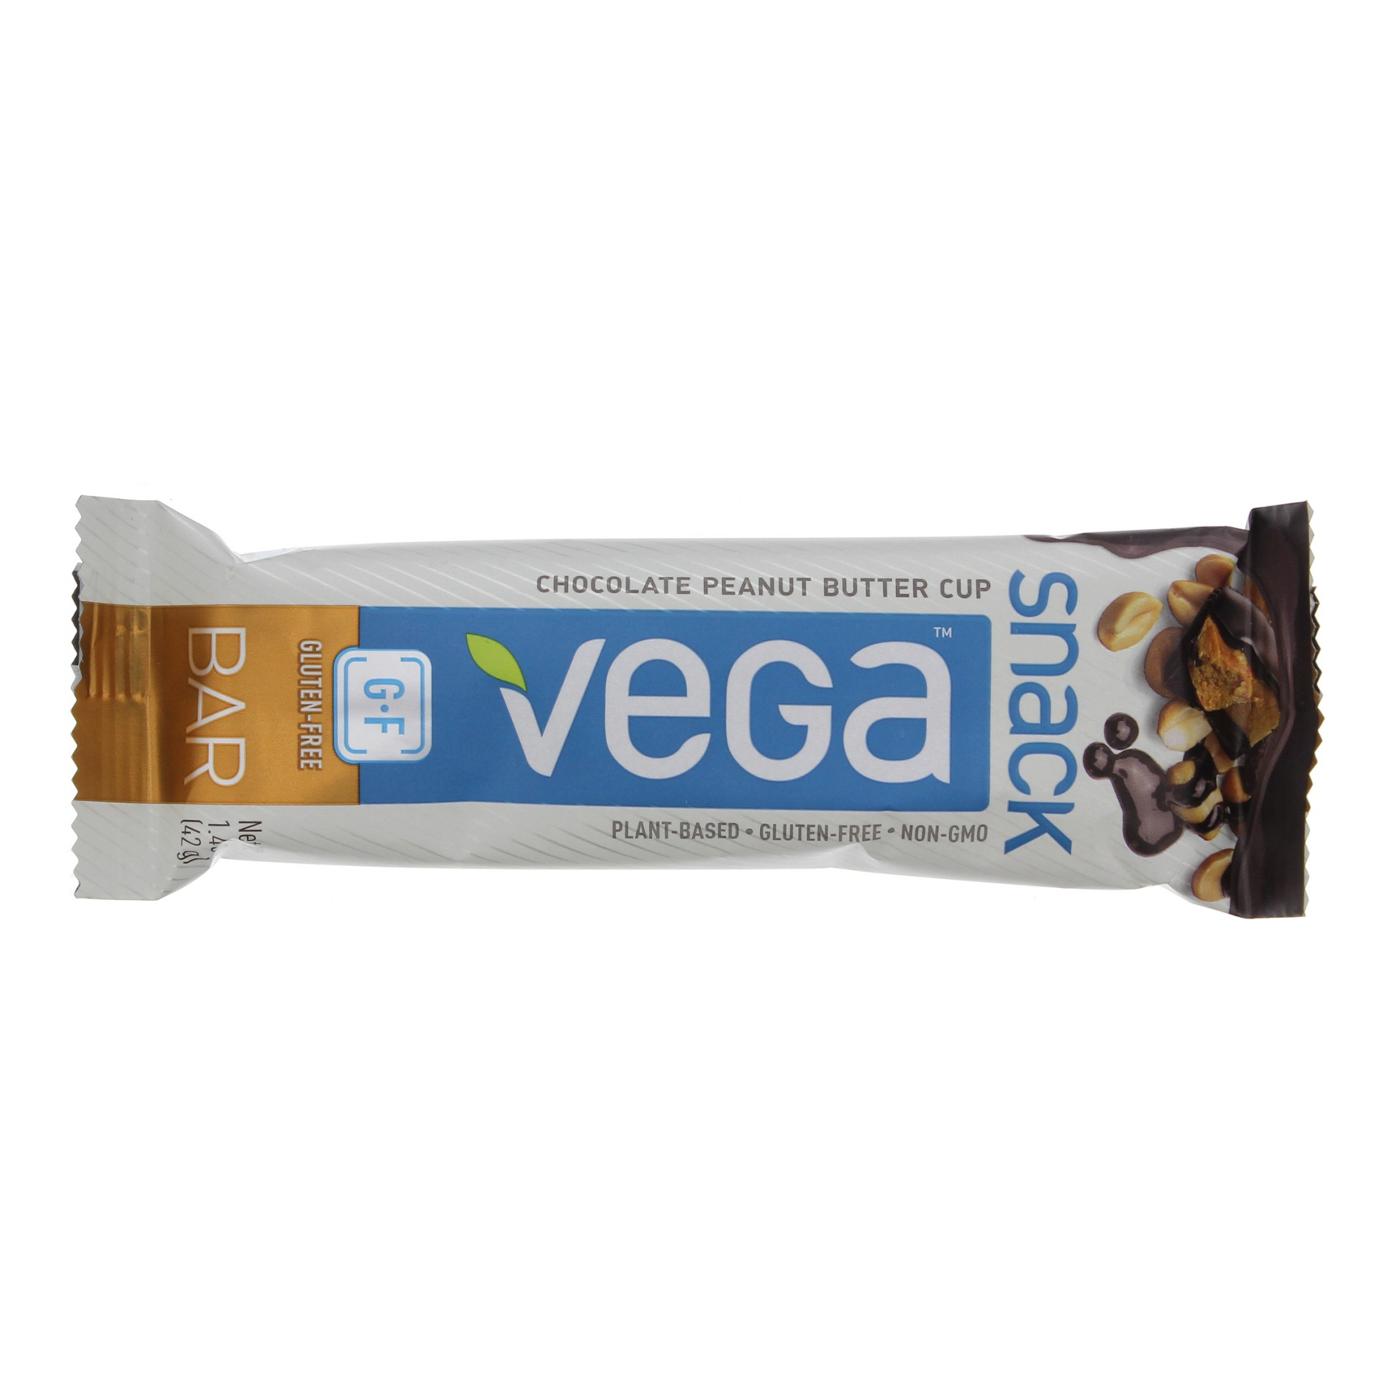 Vega Snack Bar Chocolate Peanut Butter Cup; image 1 of 2